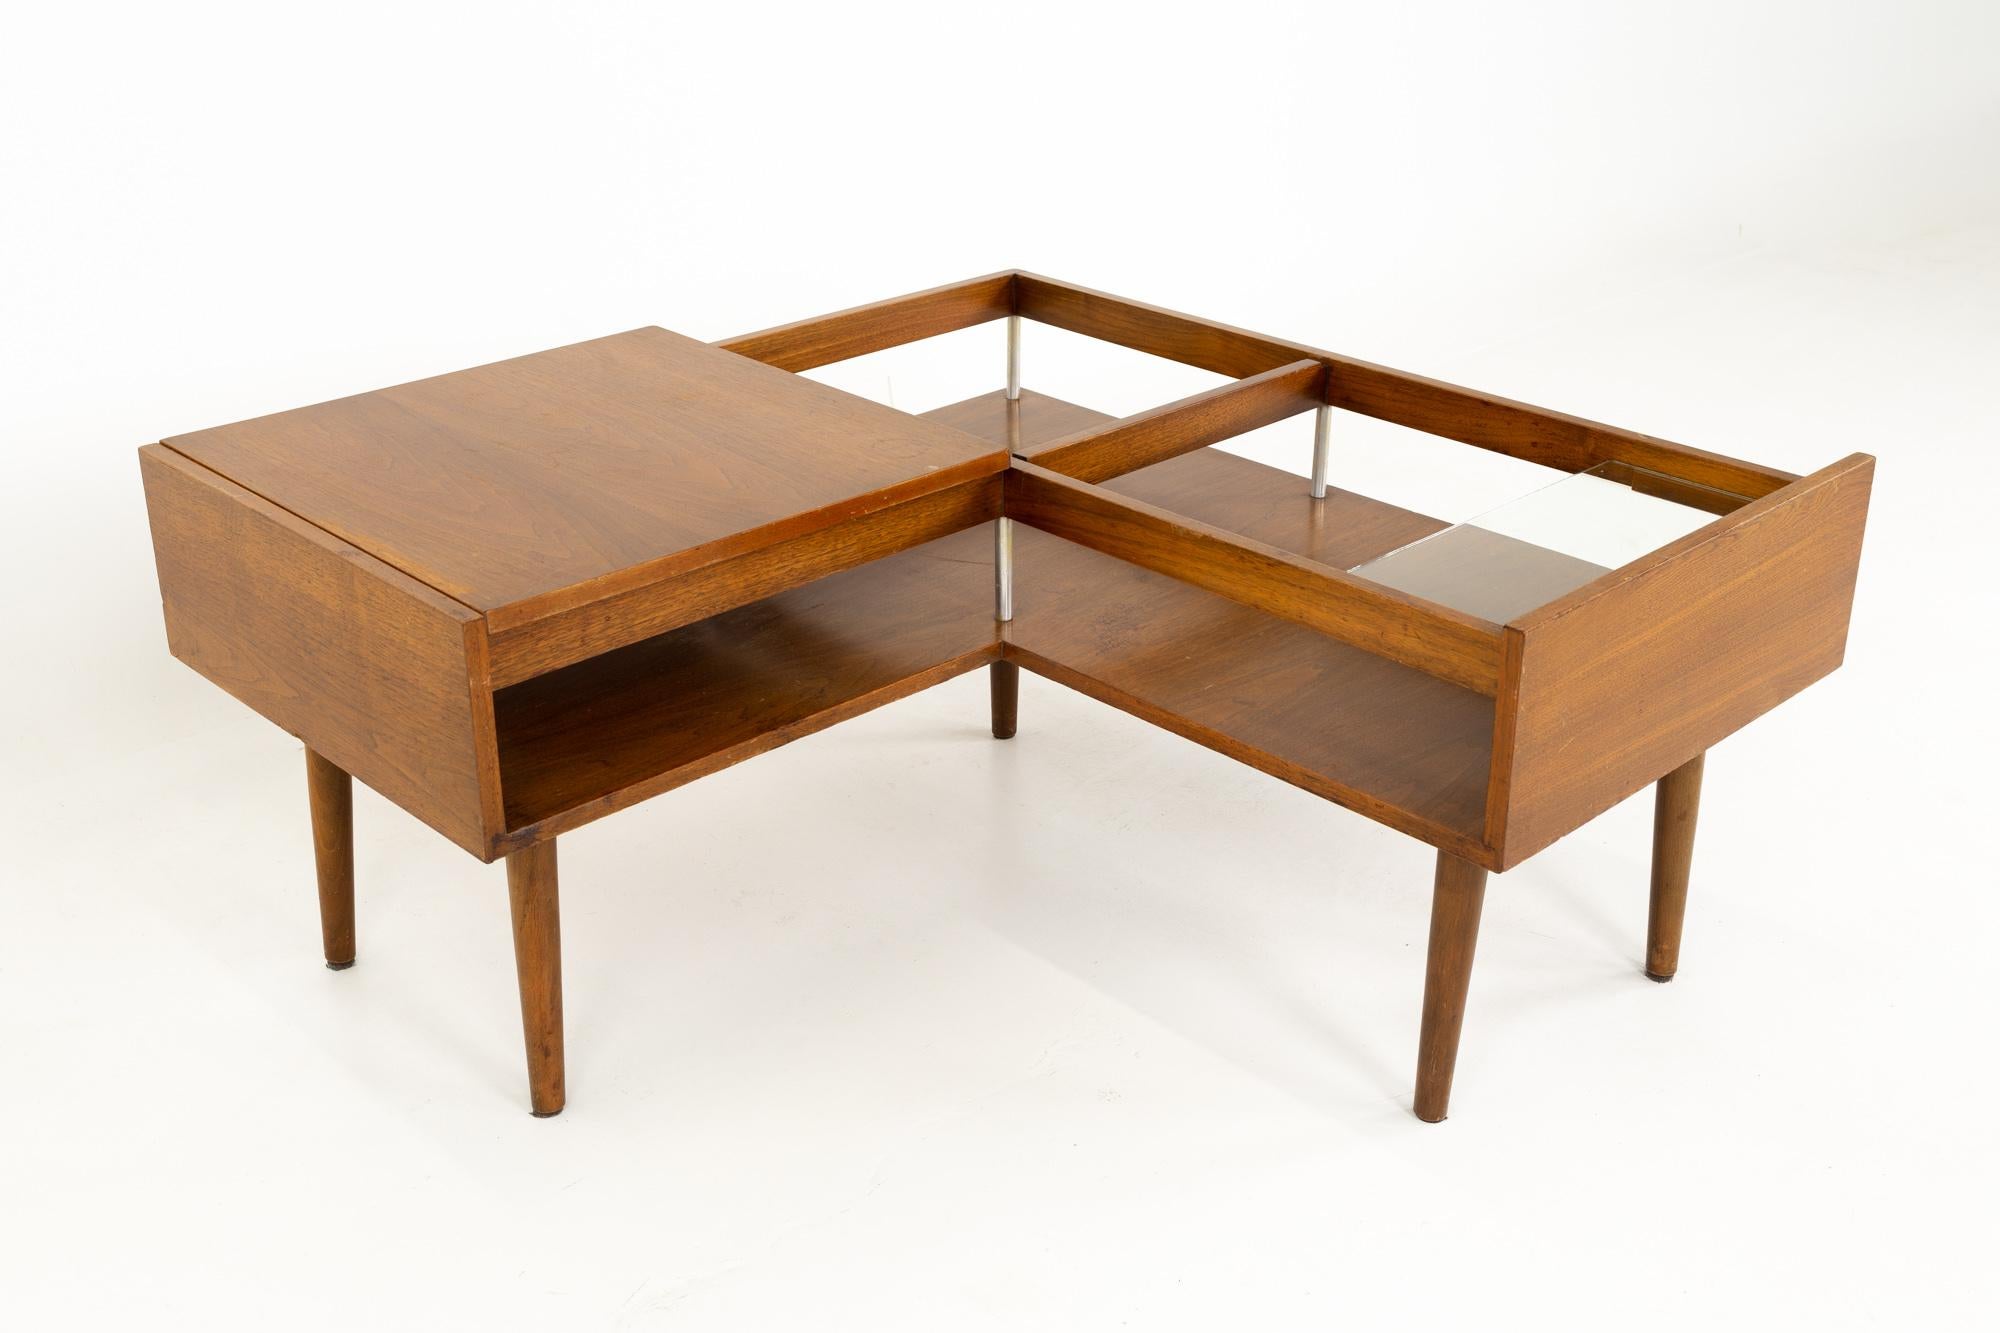 Milo Baughman for Glenn of California mid century walnut corner coffee table
This coffee table is 42 wide x 21 deep x 20.25 inches high, and each leaf is 17.25 wide x 8.25 inches

All pieces of furniture can be had in what we call restored